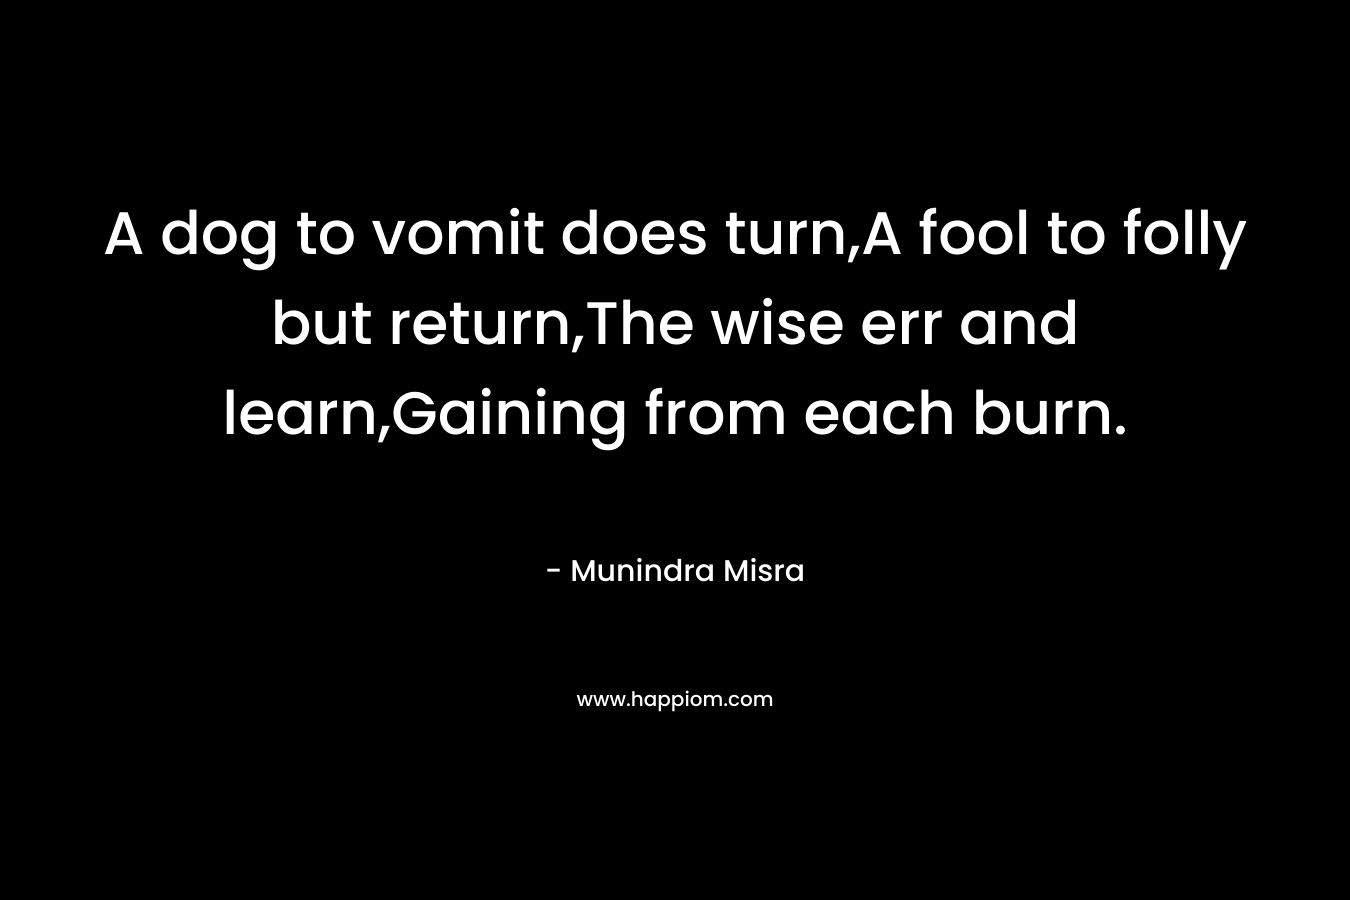 A dog to vomit does turn,A fool to folly but return,The wise err and learn,Gaining from each burn. – Munindra Misra